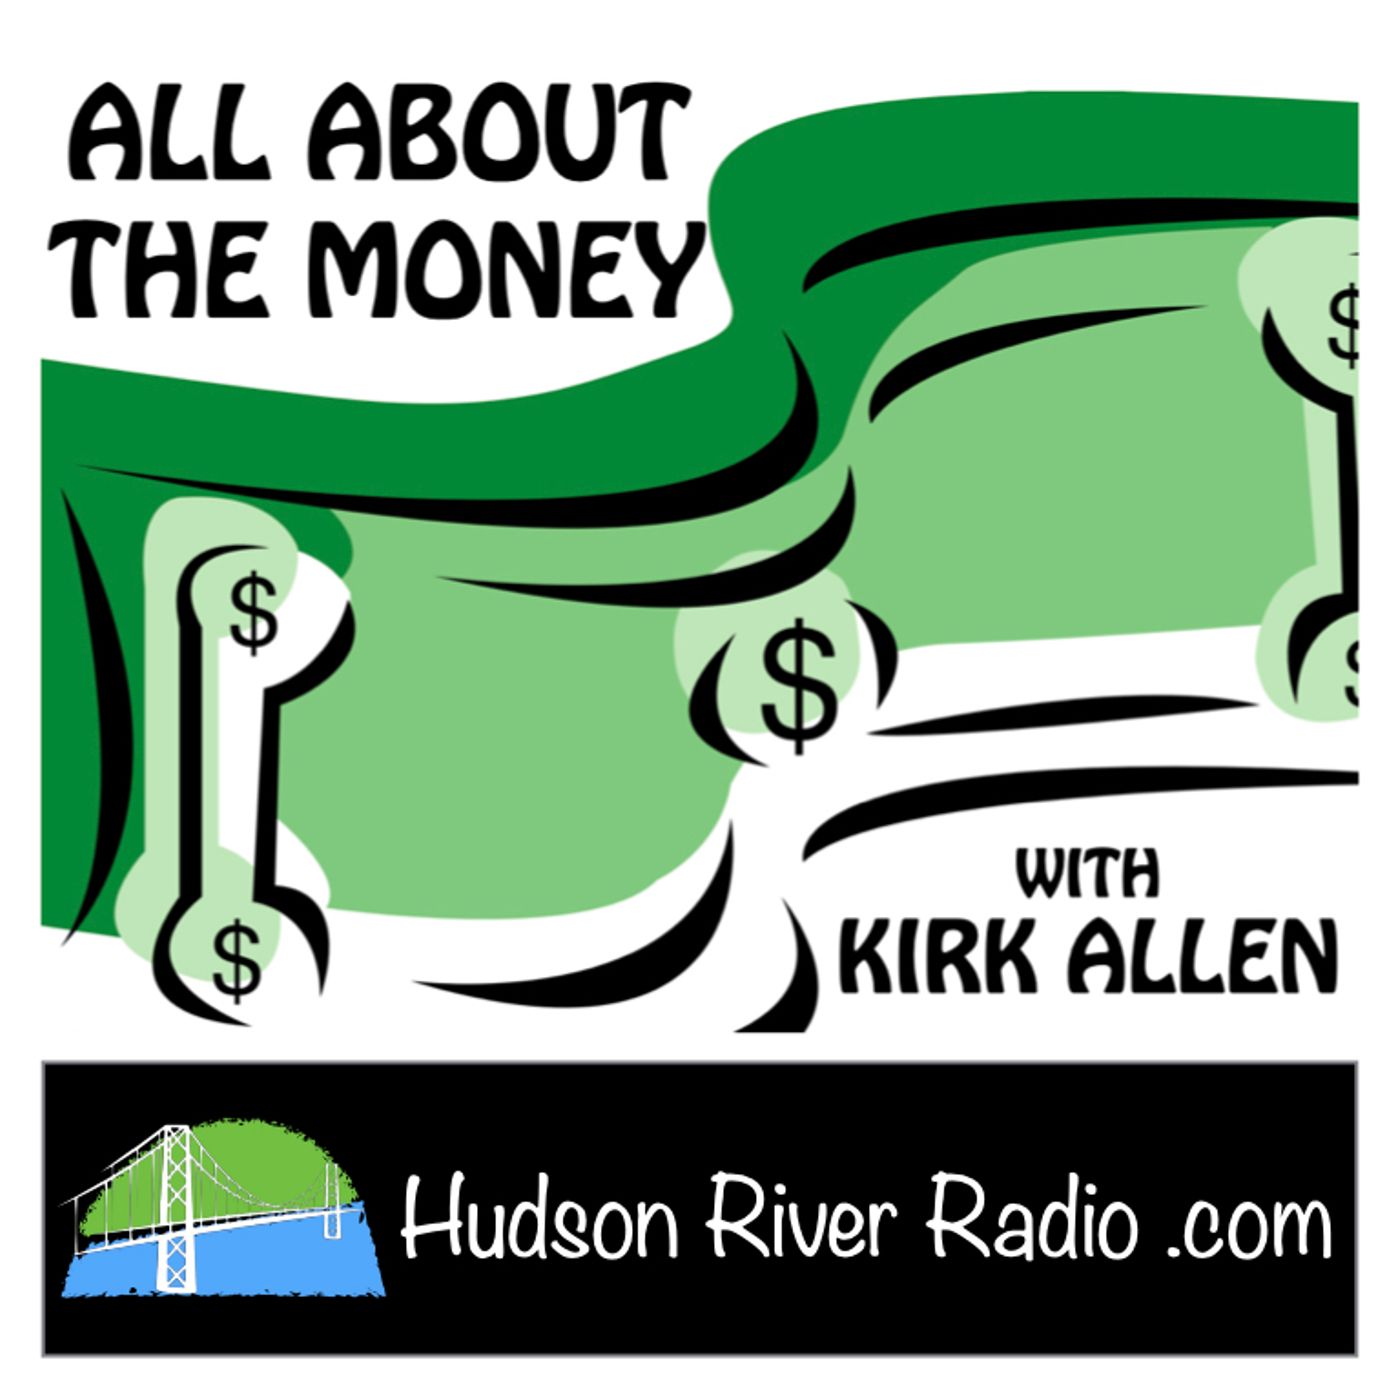 All About The Money with Kirk Allen